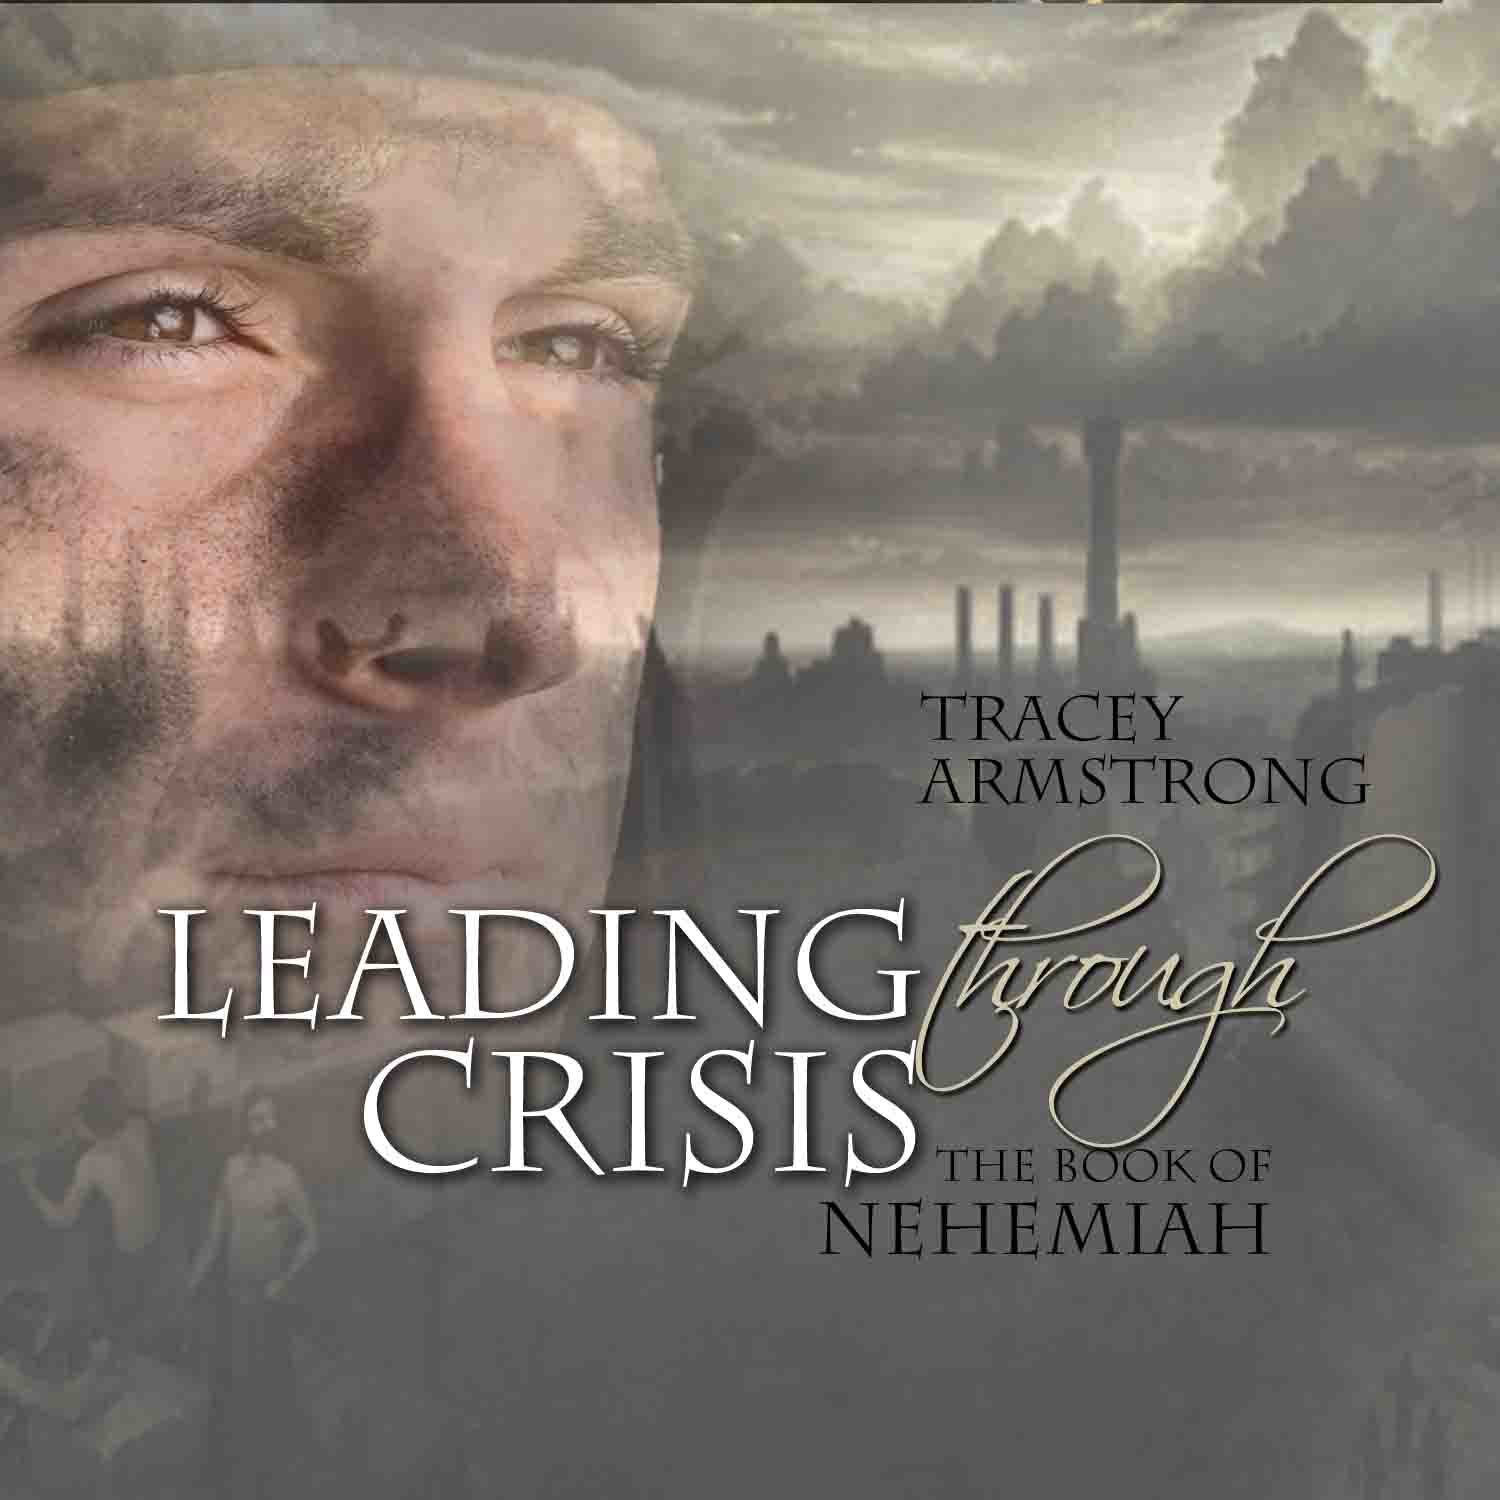 Leading Through Crisis (from the book of Nehemiah) Set 2 (Download)